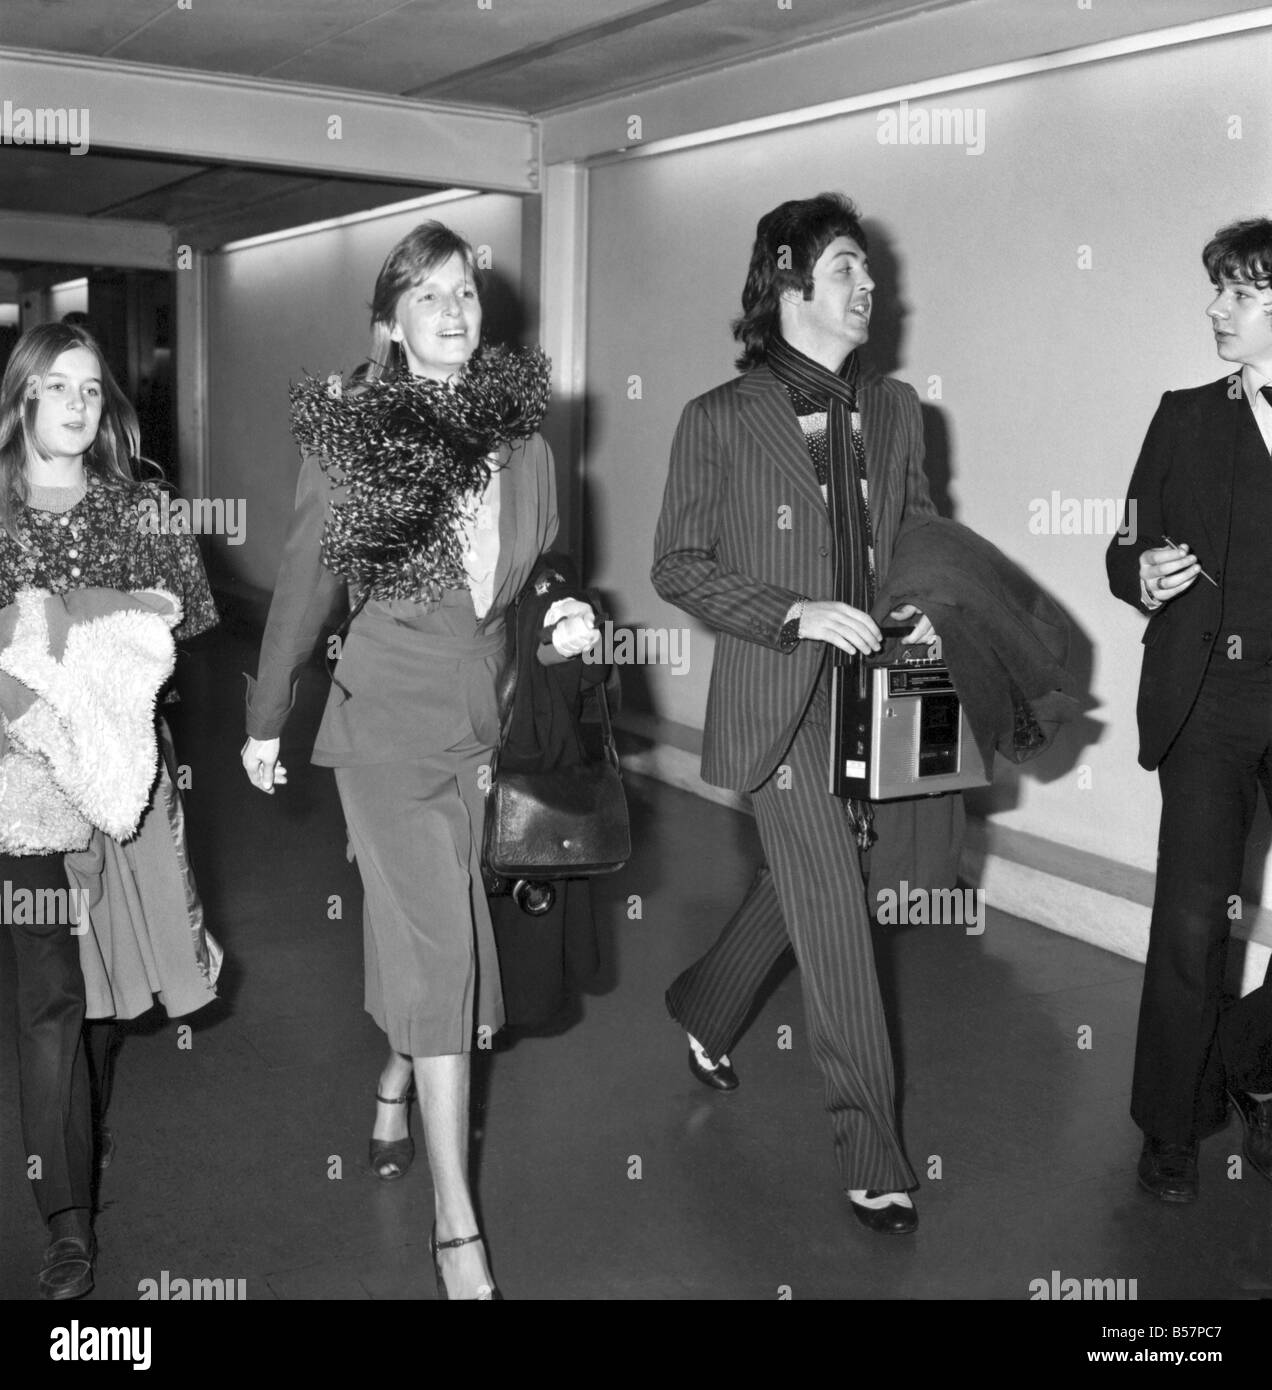 Pop star Paul McCartney and family. Carrying a portable radio, ex-Beatle Paul McCartney leaves Heathrow Airport today for a New Stock Photo